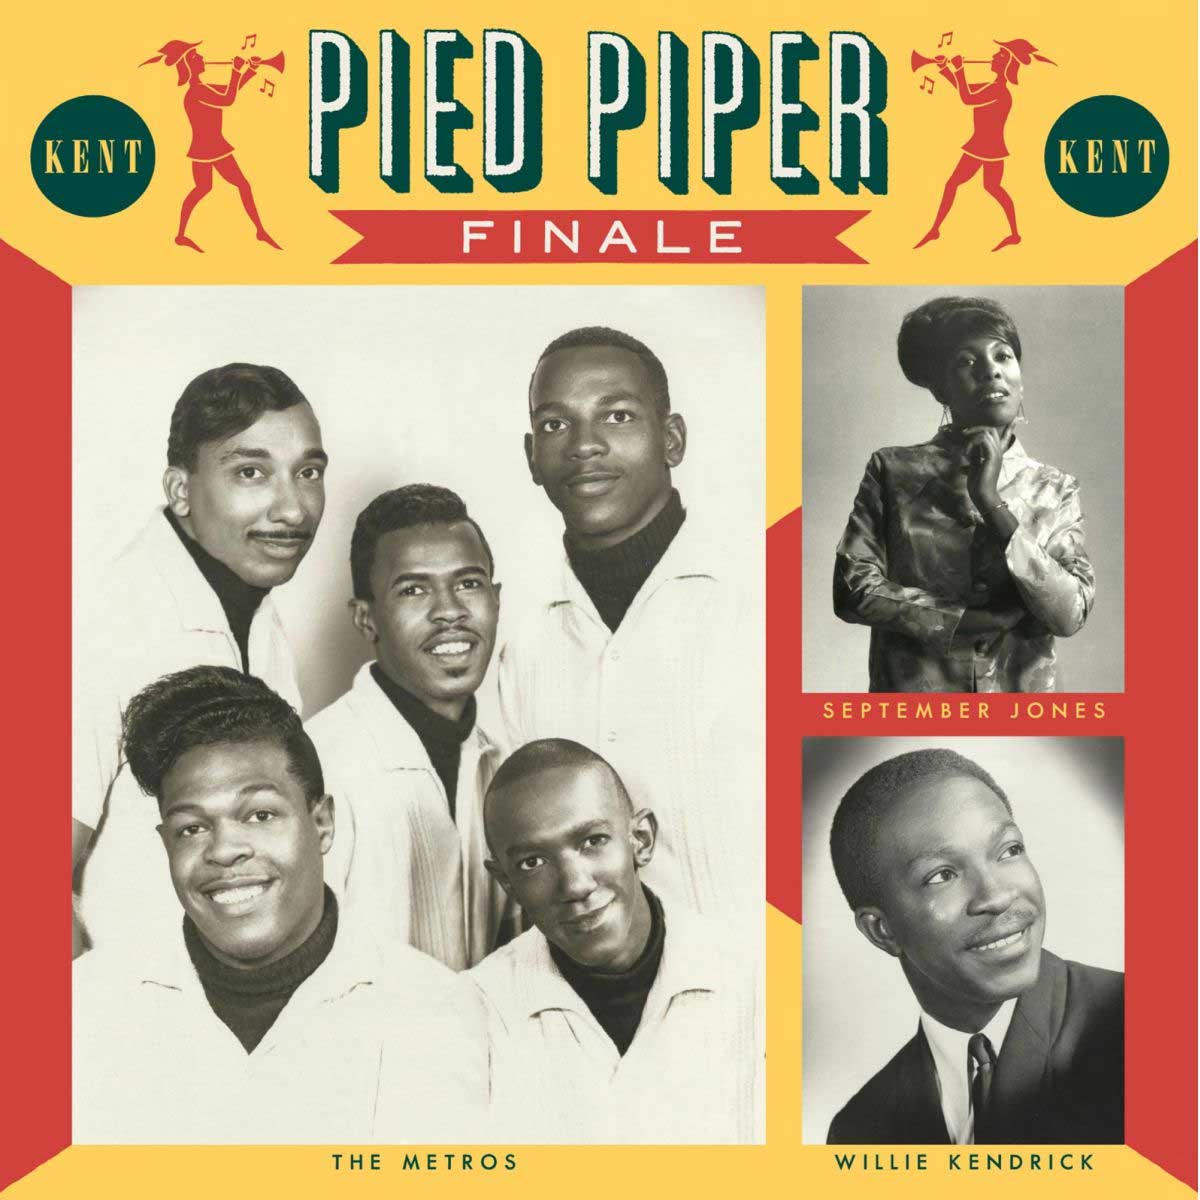 Pied Piper Finale - Kent Records CD